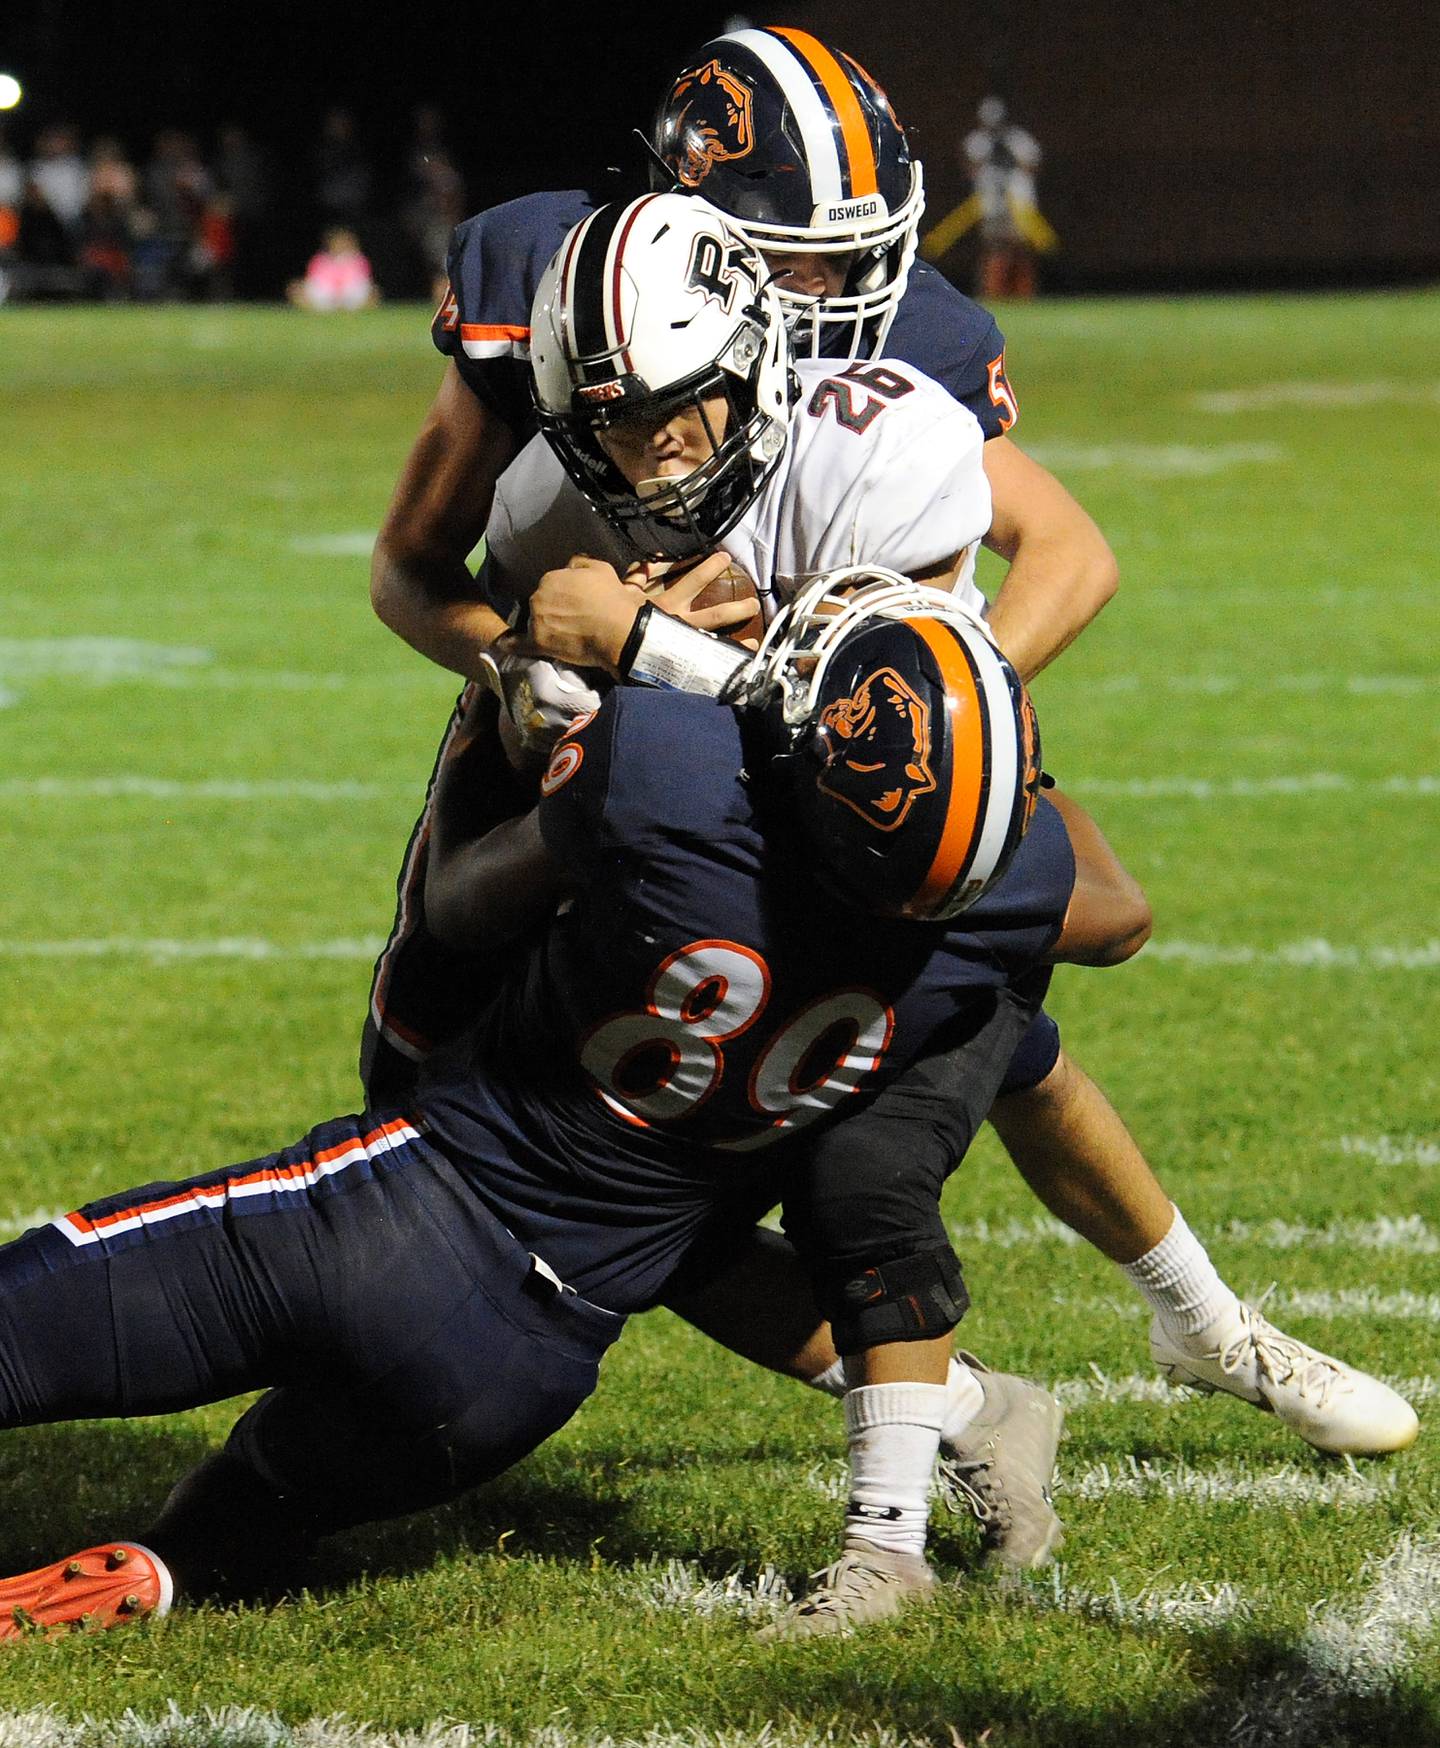 Plainfield North running back Jared Gumila (26) gets tackled out-of-bound by Oswego defensive end Taiden Thomas (89) and line backer Nate Perry (54) after gaining a first down during a varsity football game at Oswego High School on Friday.